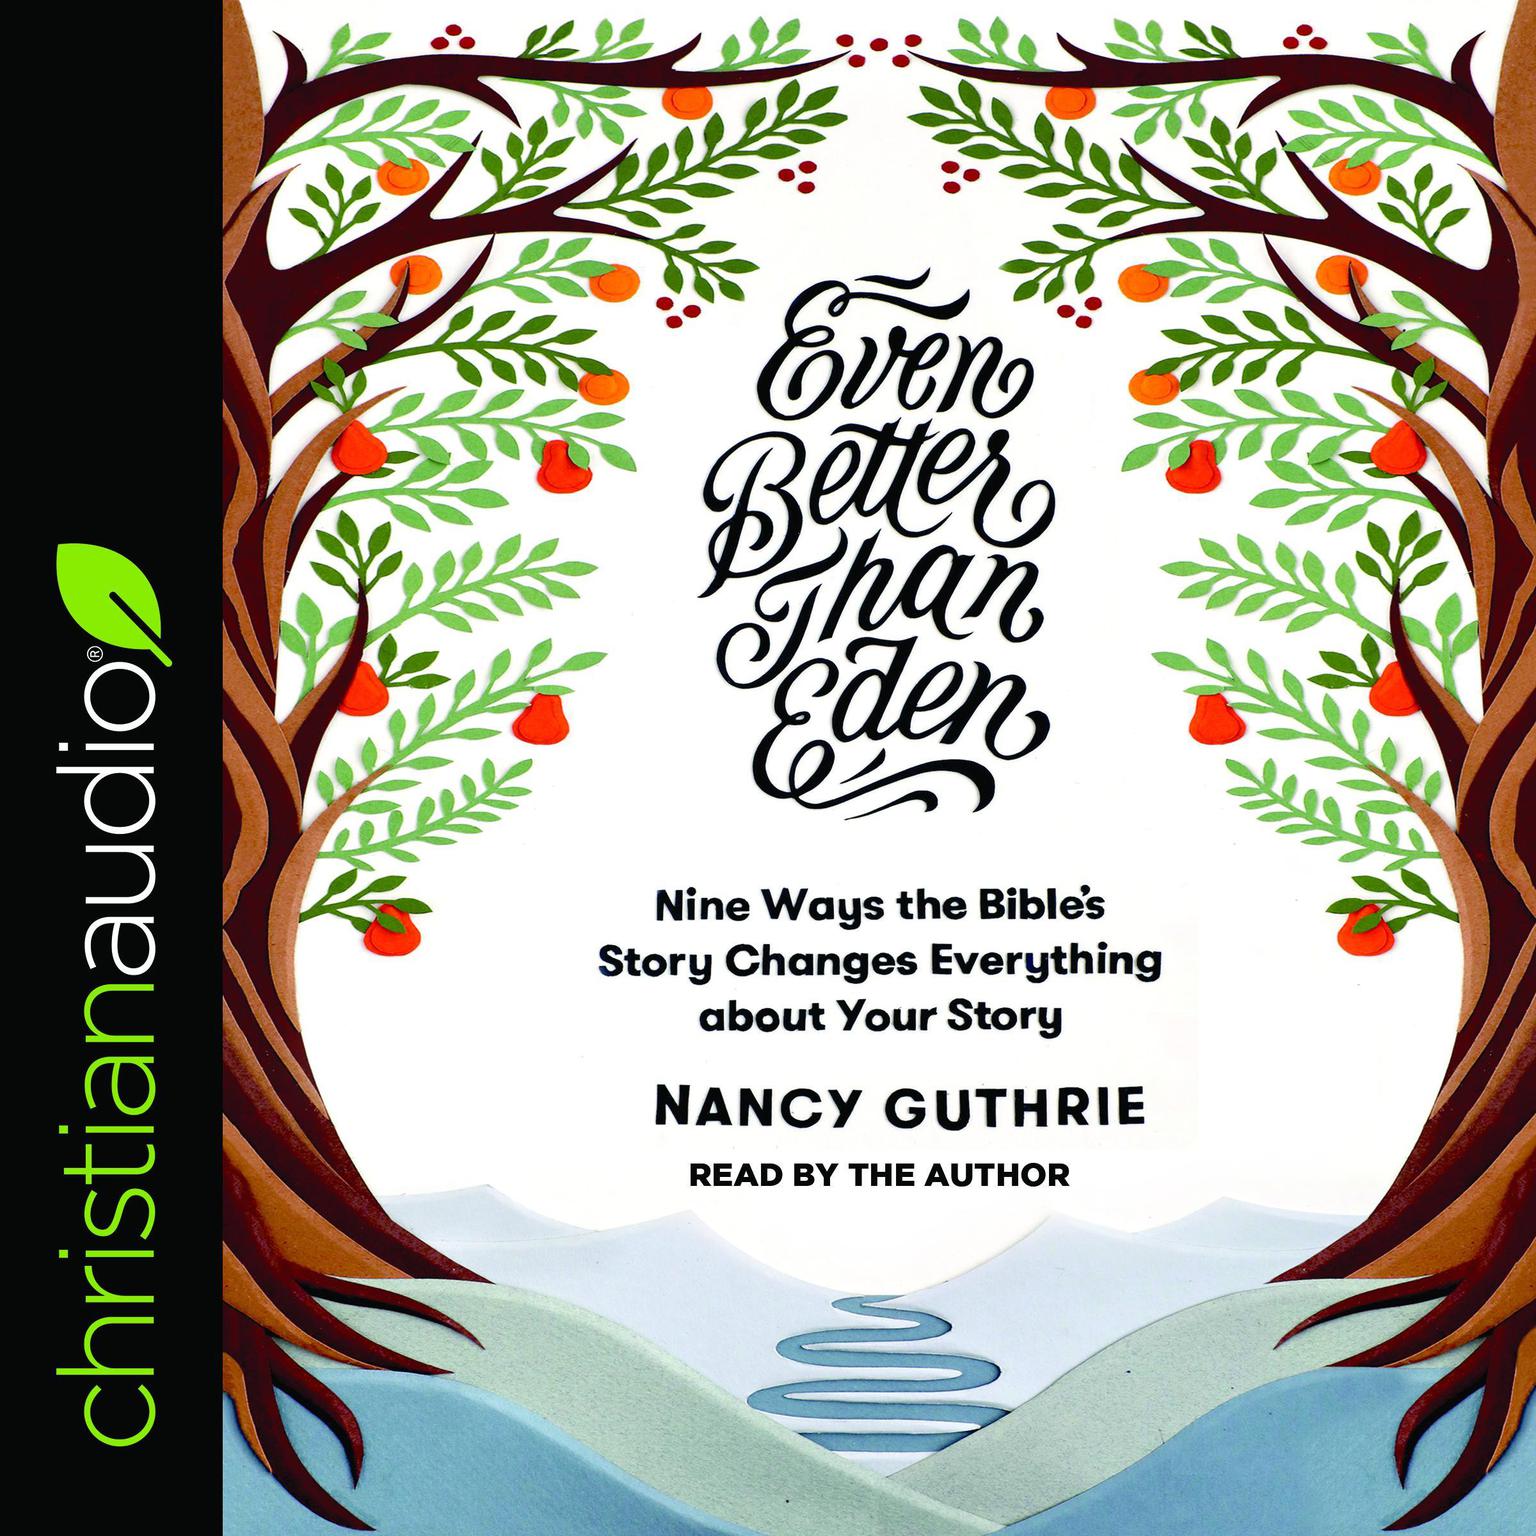 Even Better than Eden: Nine Ways the Bibles Story Changes Everything about Your Story Audiobook, by Nancy Guthrie